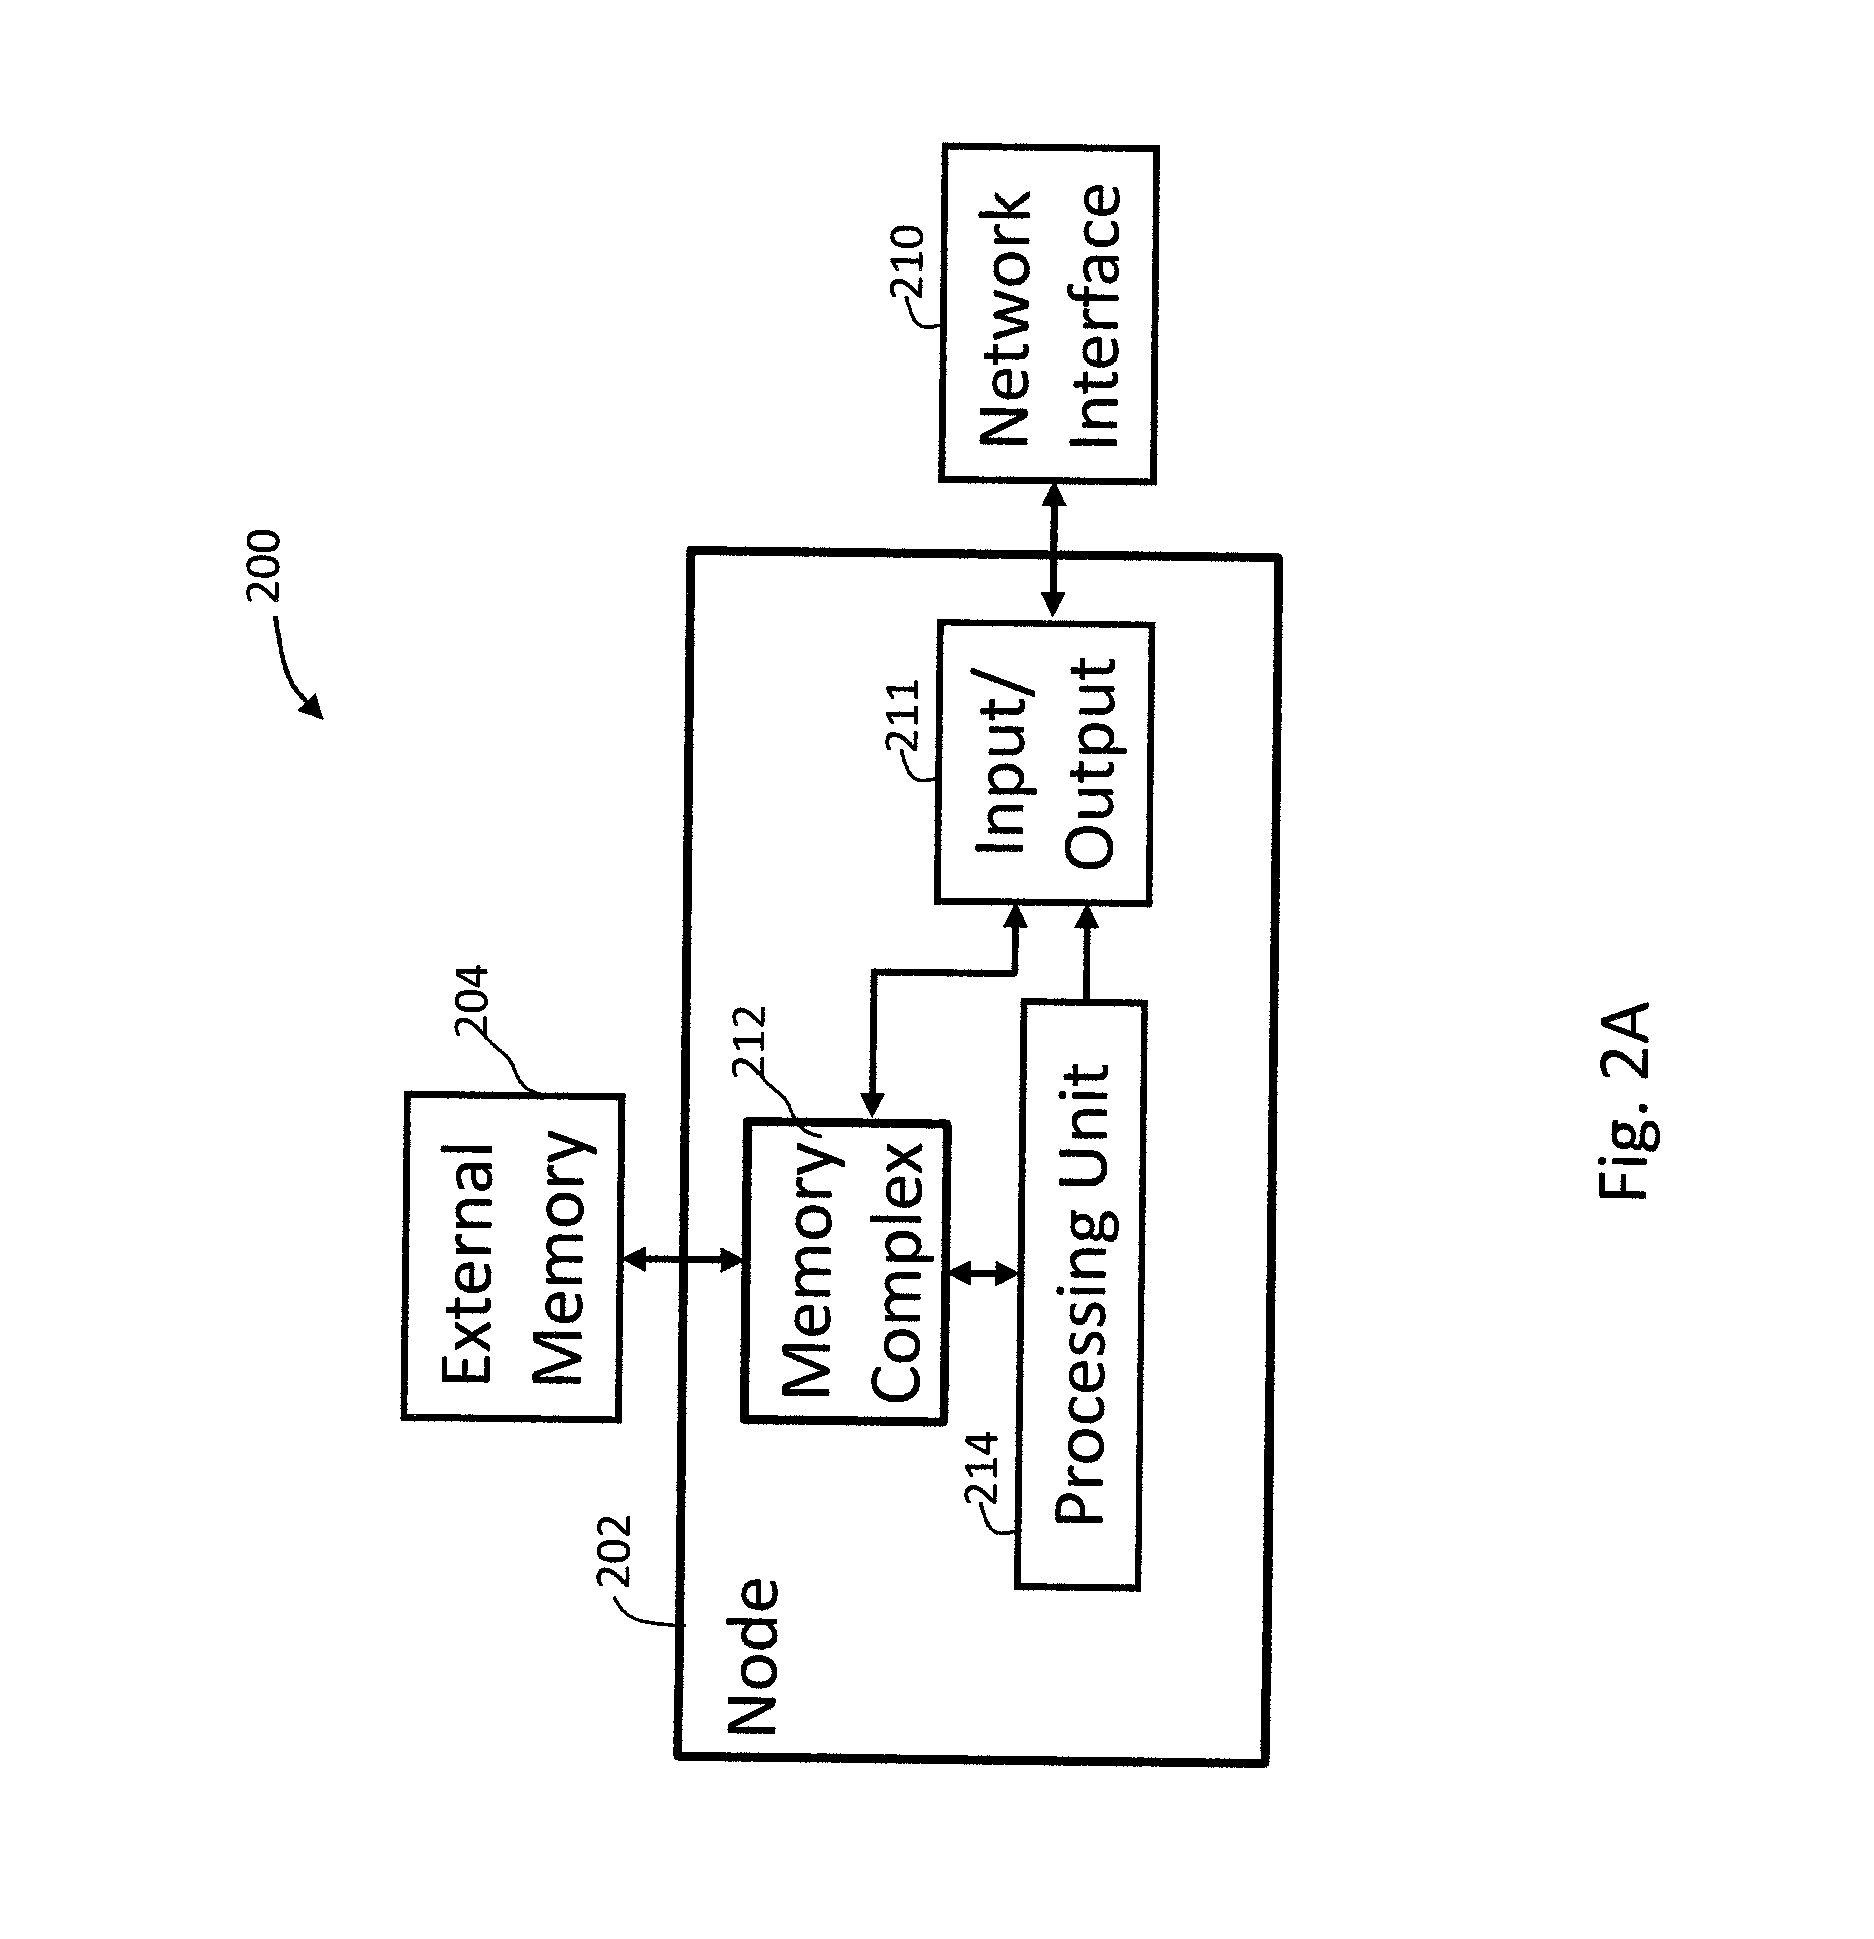 Adaptive Private Network Asynchronous Distributed Shared Memory Services